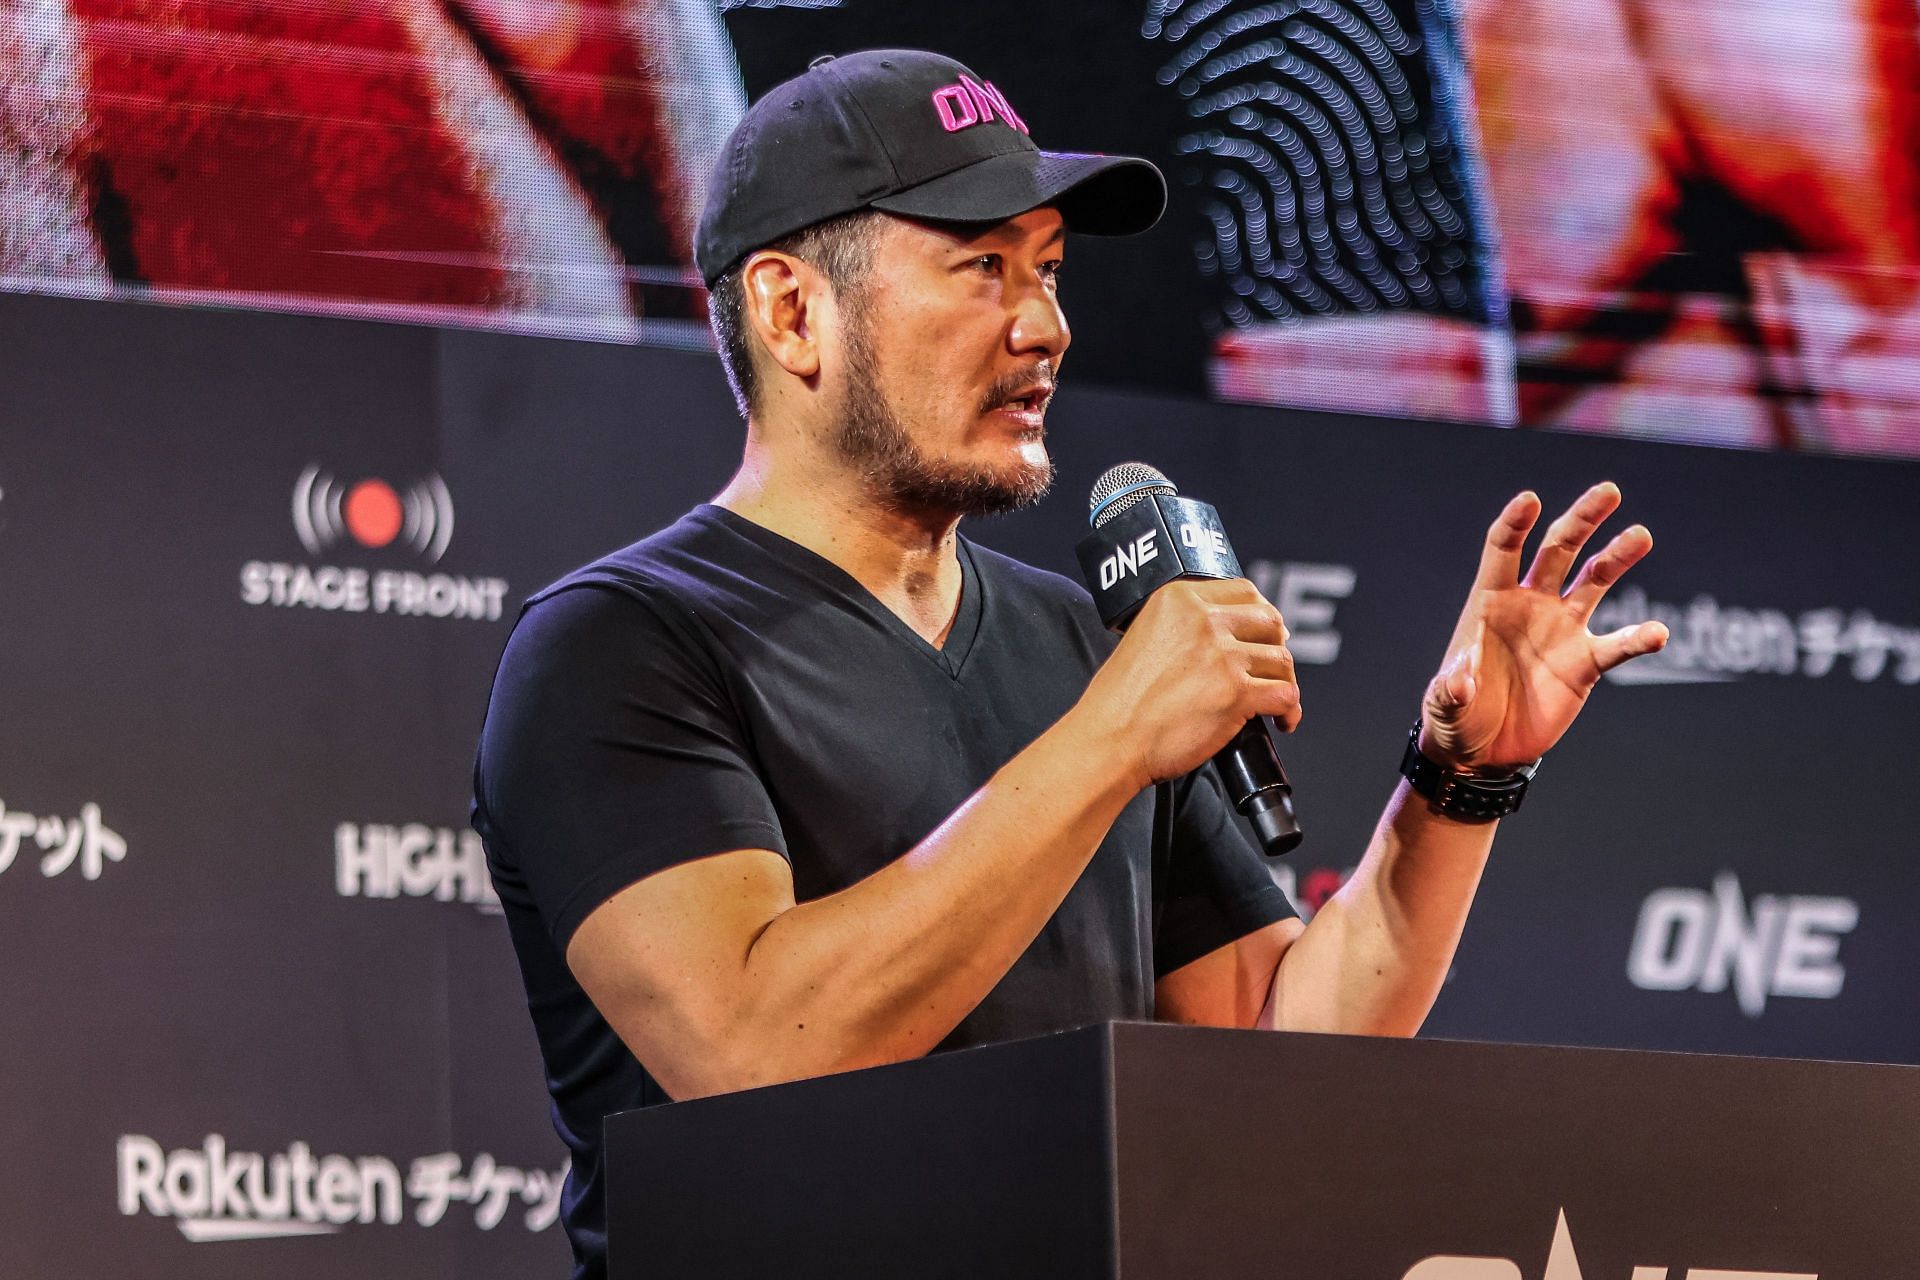 ONE Championship CEO Chatri Sityodtong speaks at the ONE 165 press conference in Tokyo.